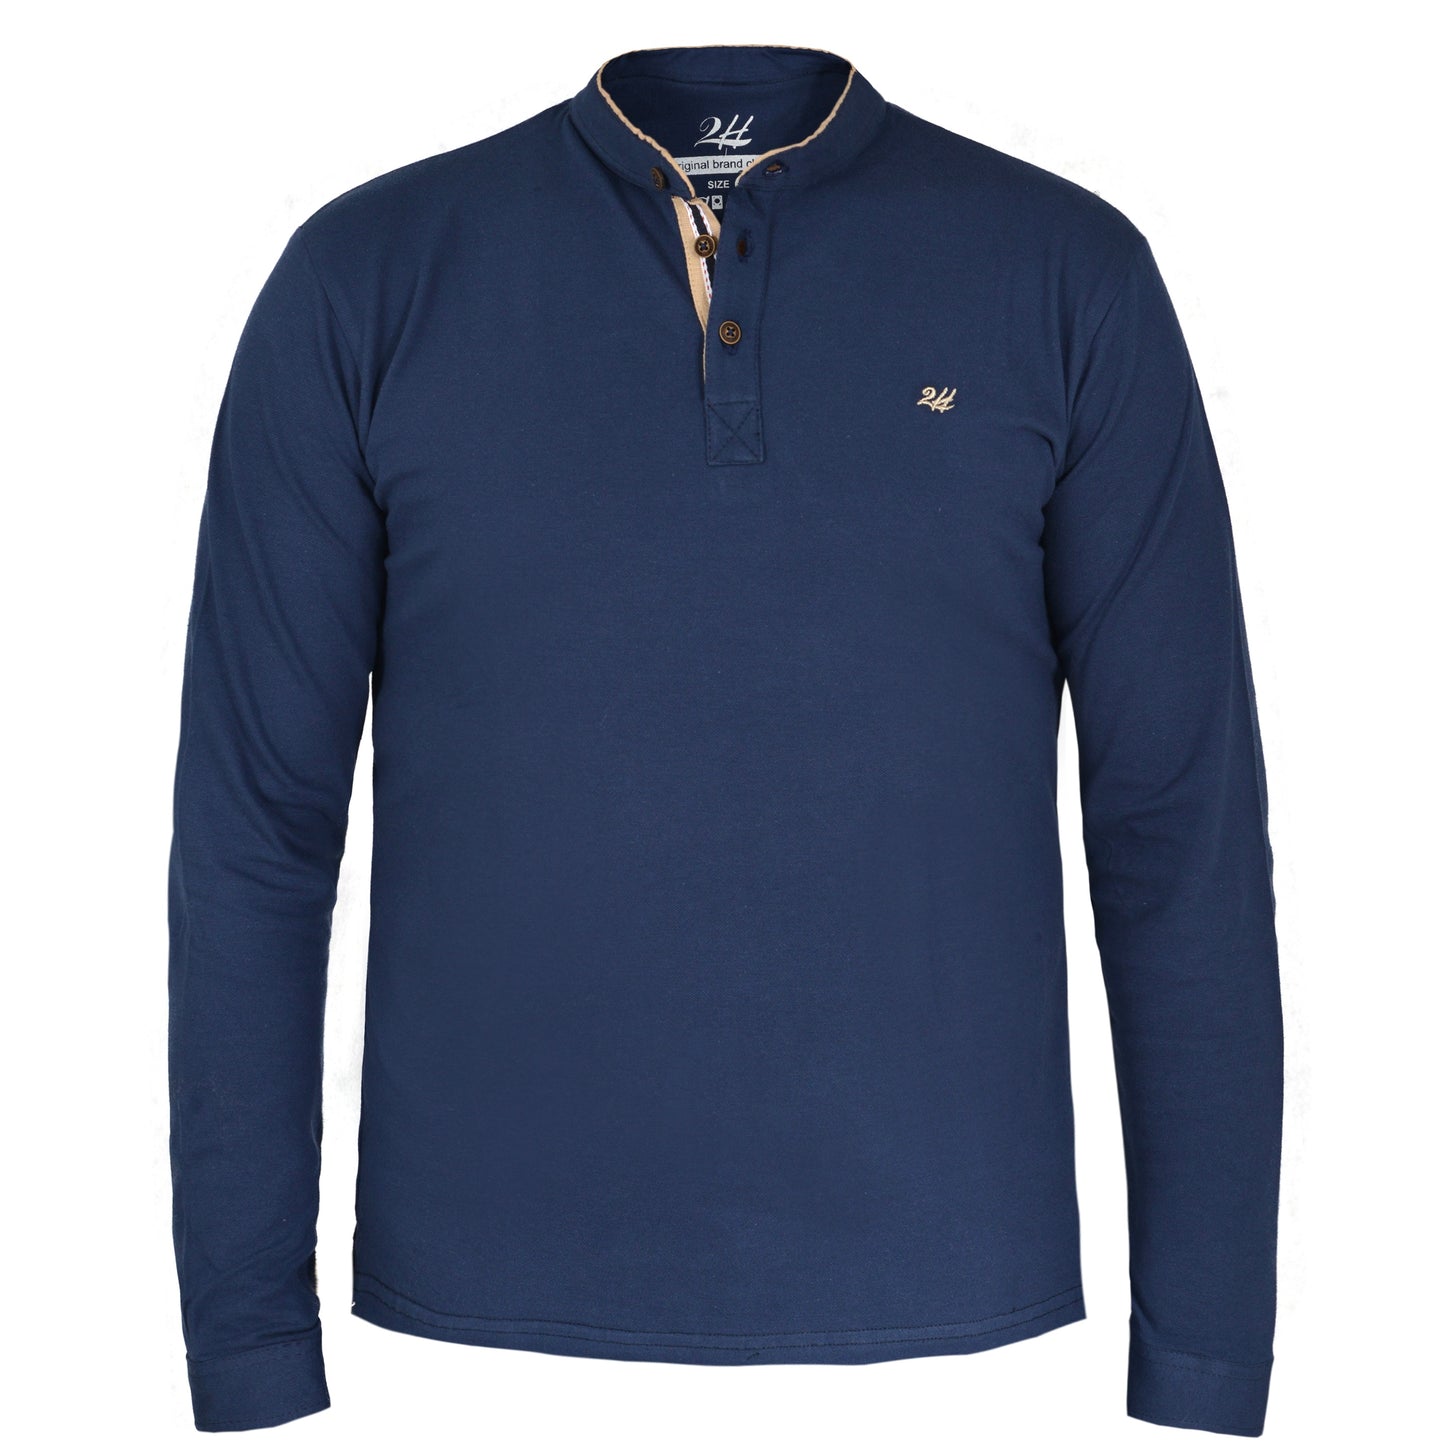 2H Navy Stand Up Collar Sweater